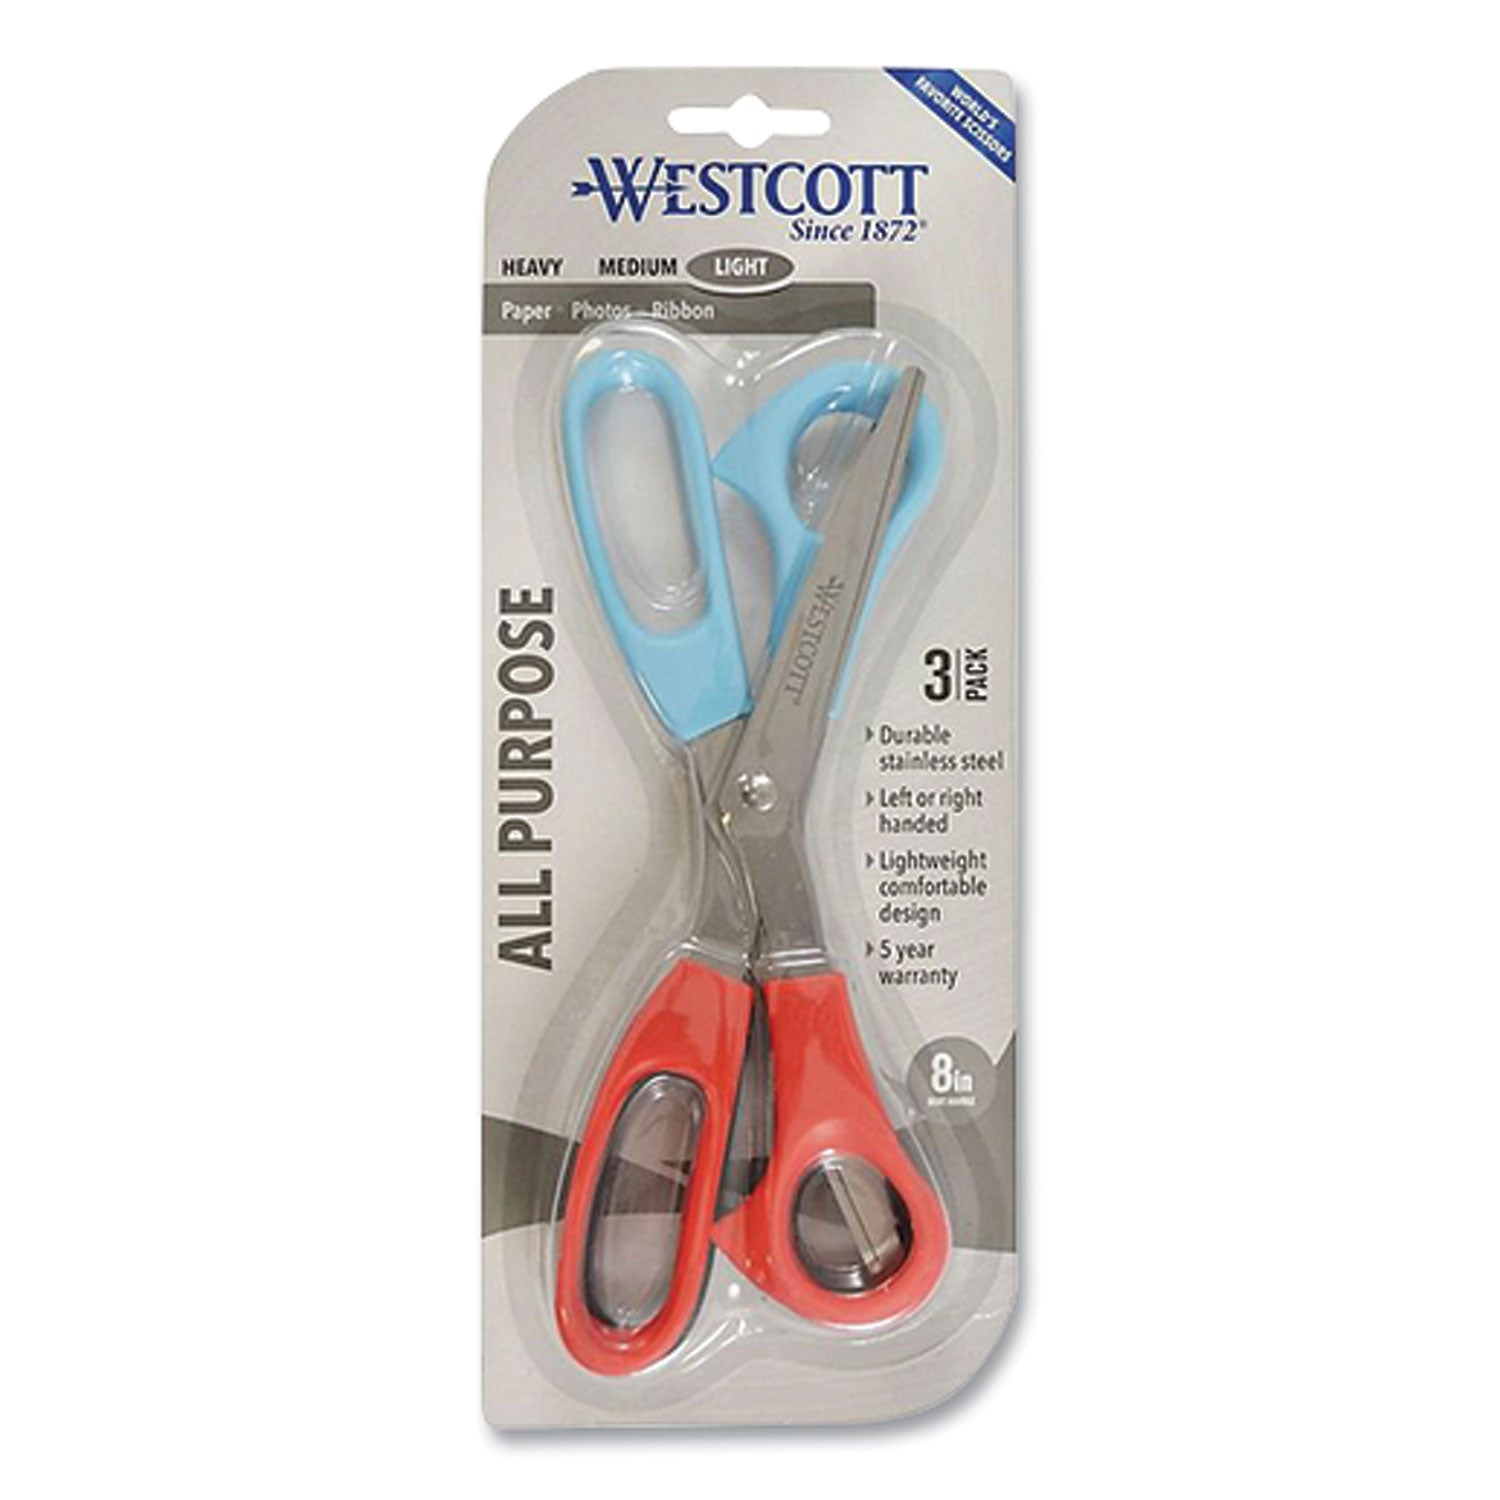 all-purpose-value-stainless-steel-scissors-three-pack-8-long-3-cut-length-assorted-color-offset-handles-3-pack_wtc13023 - 1